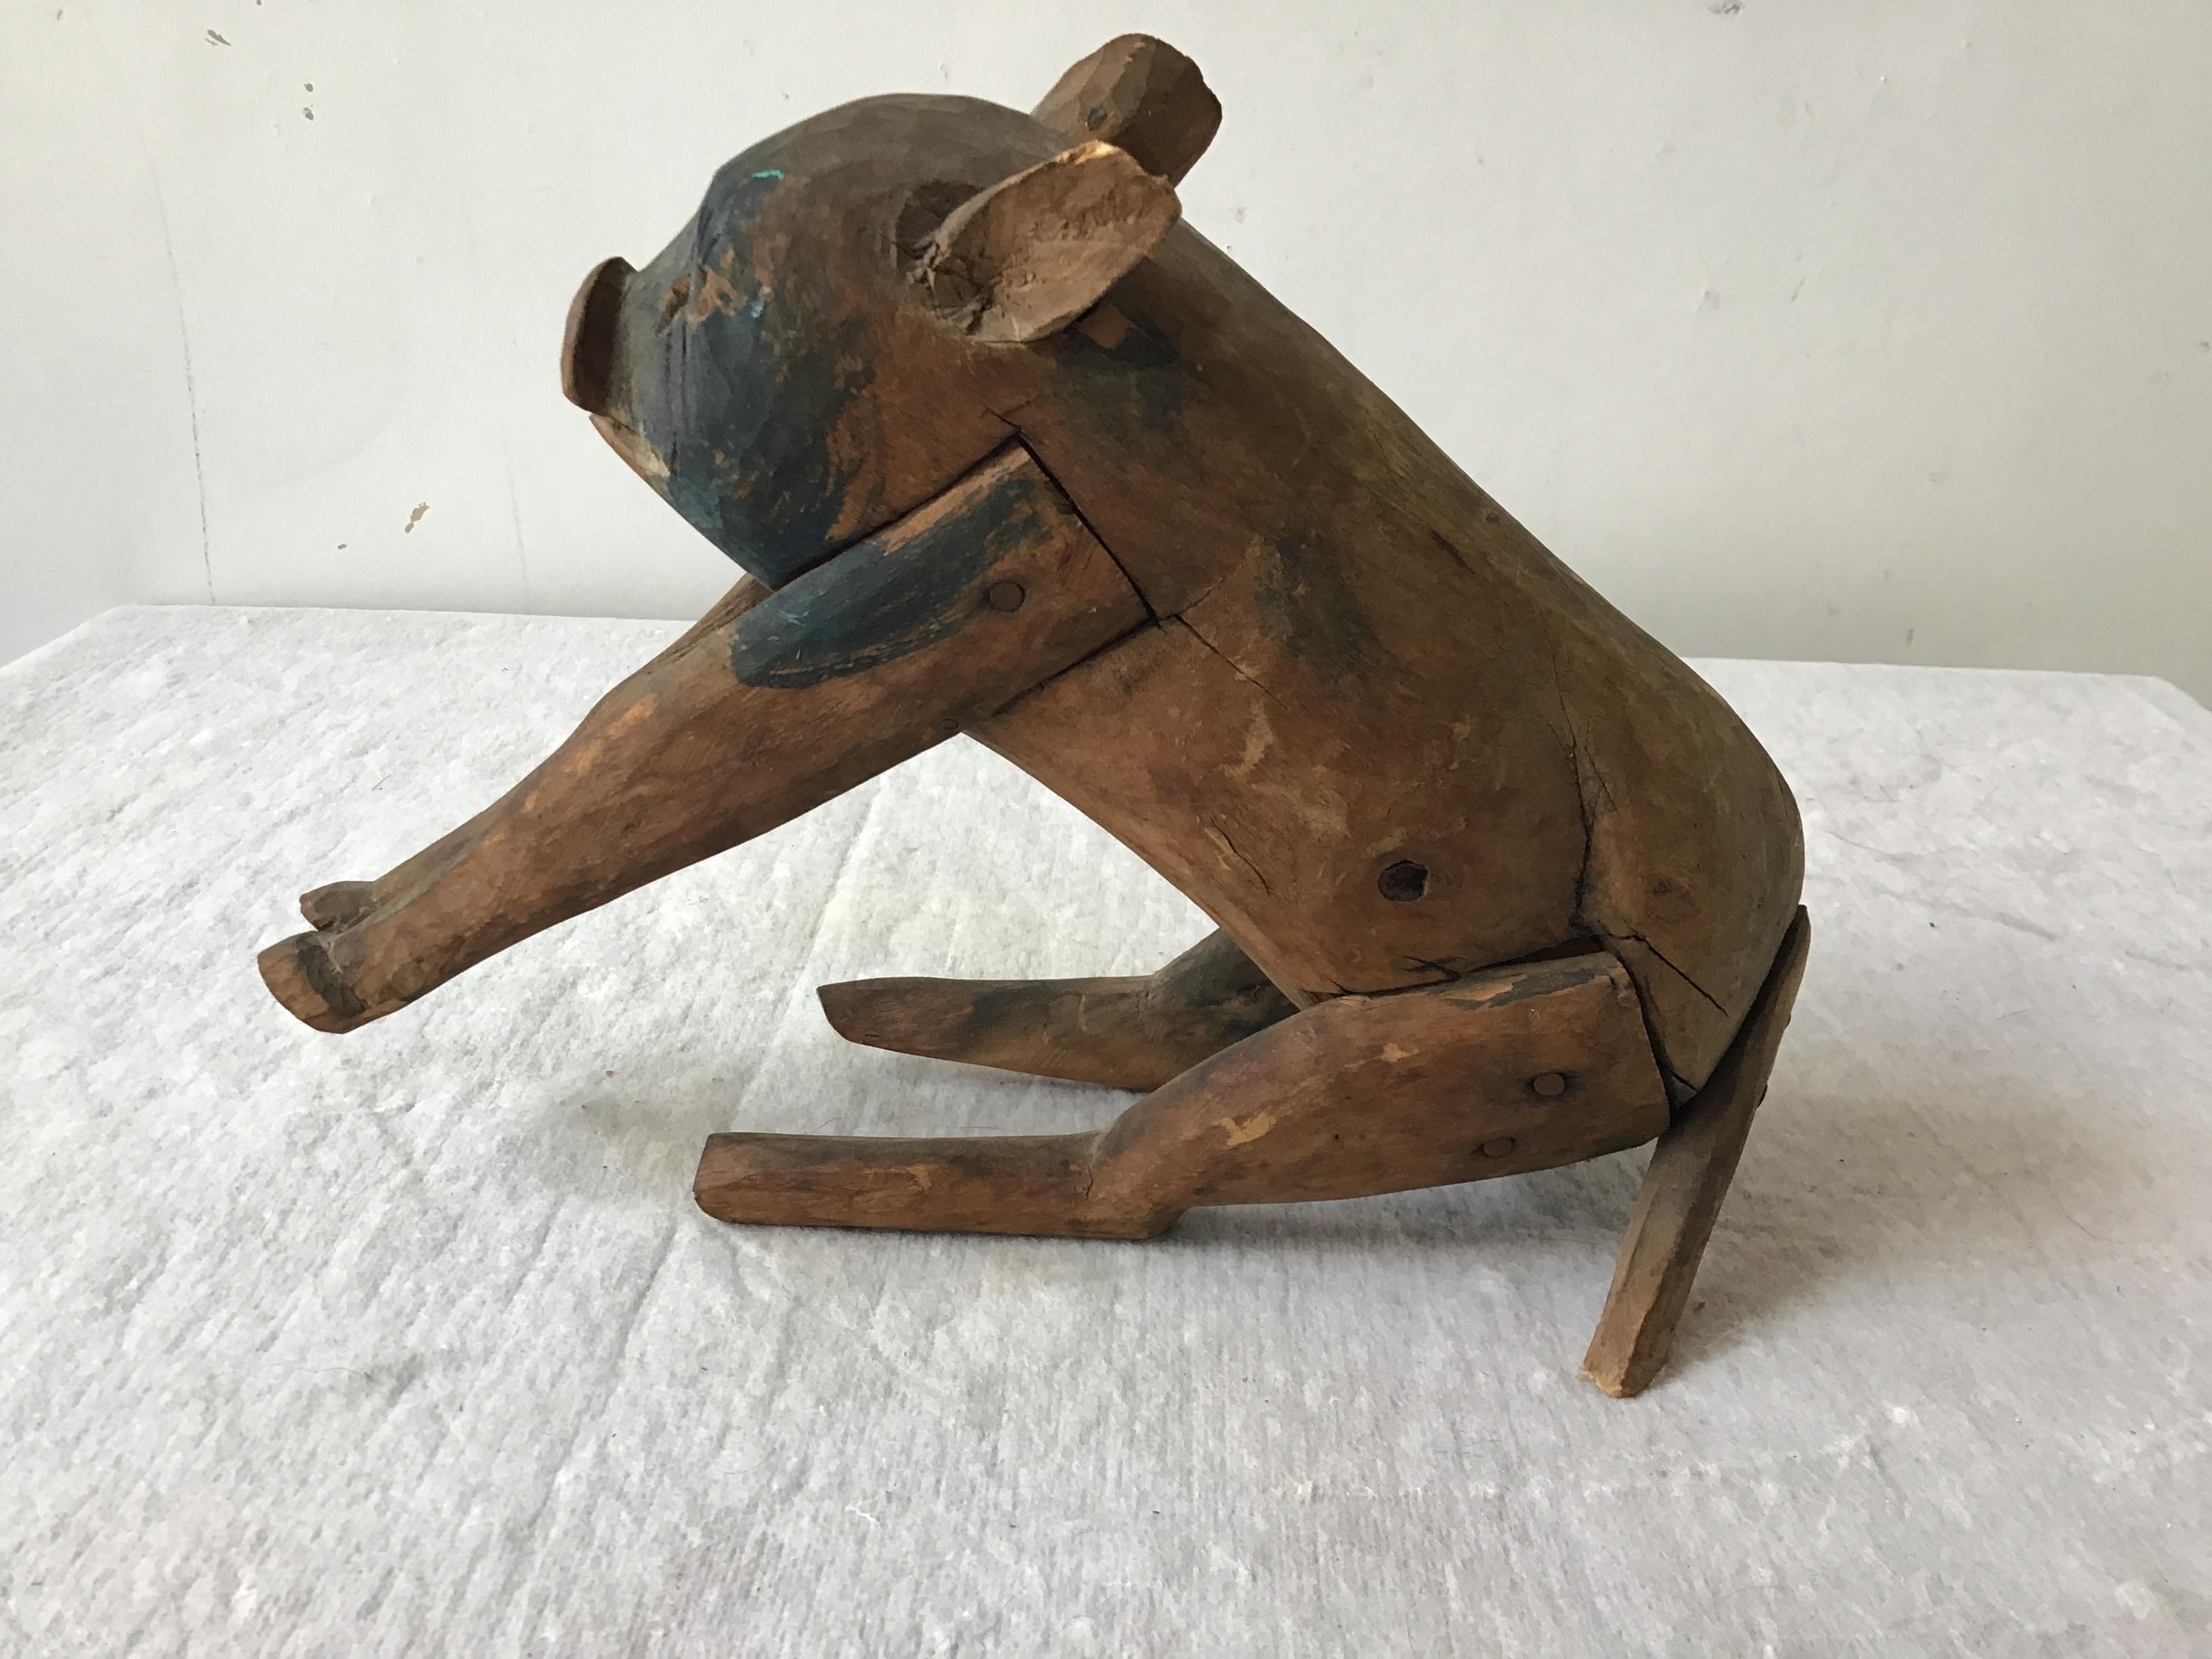 1870s carved wood pig. Great worn paint.